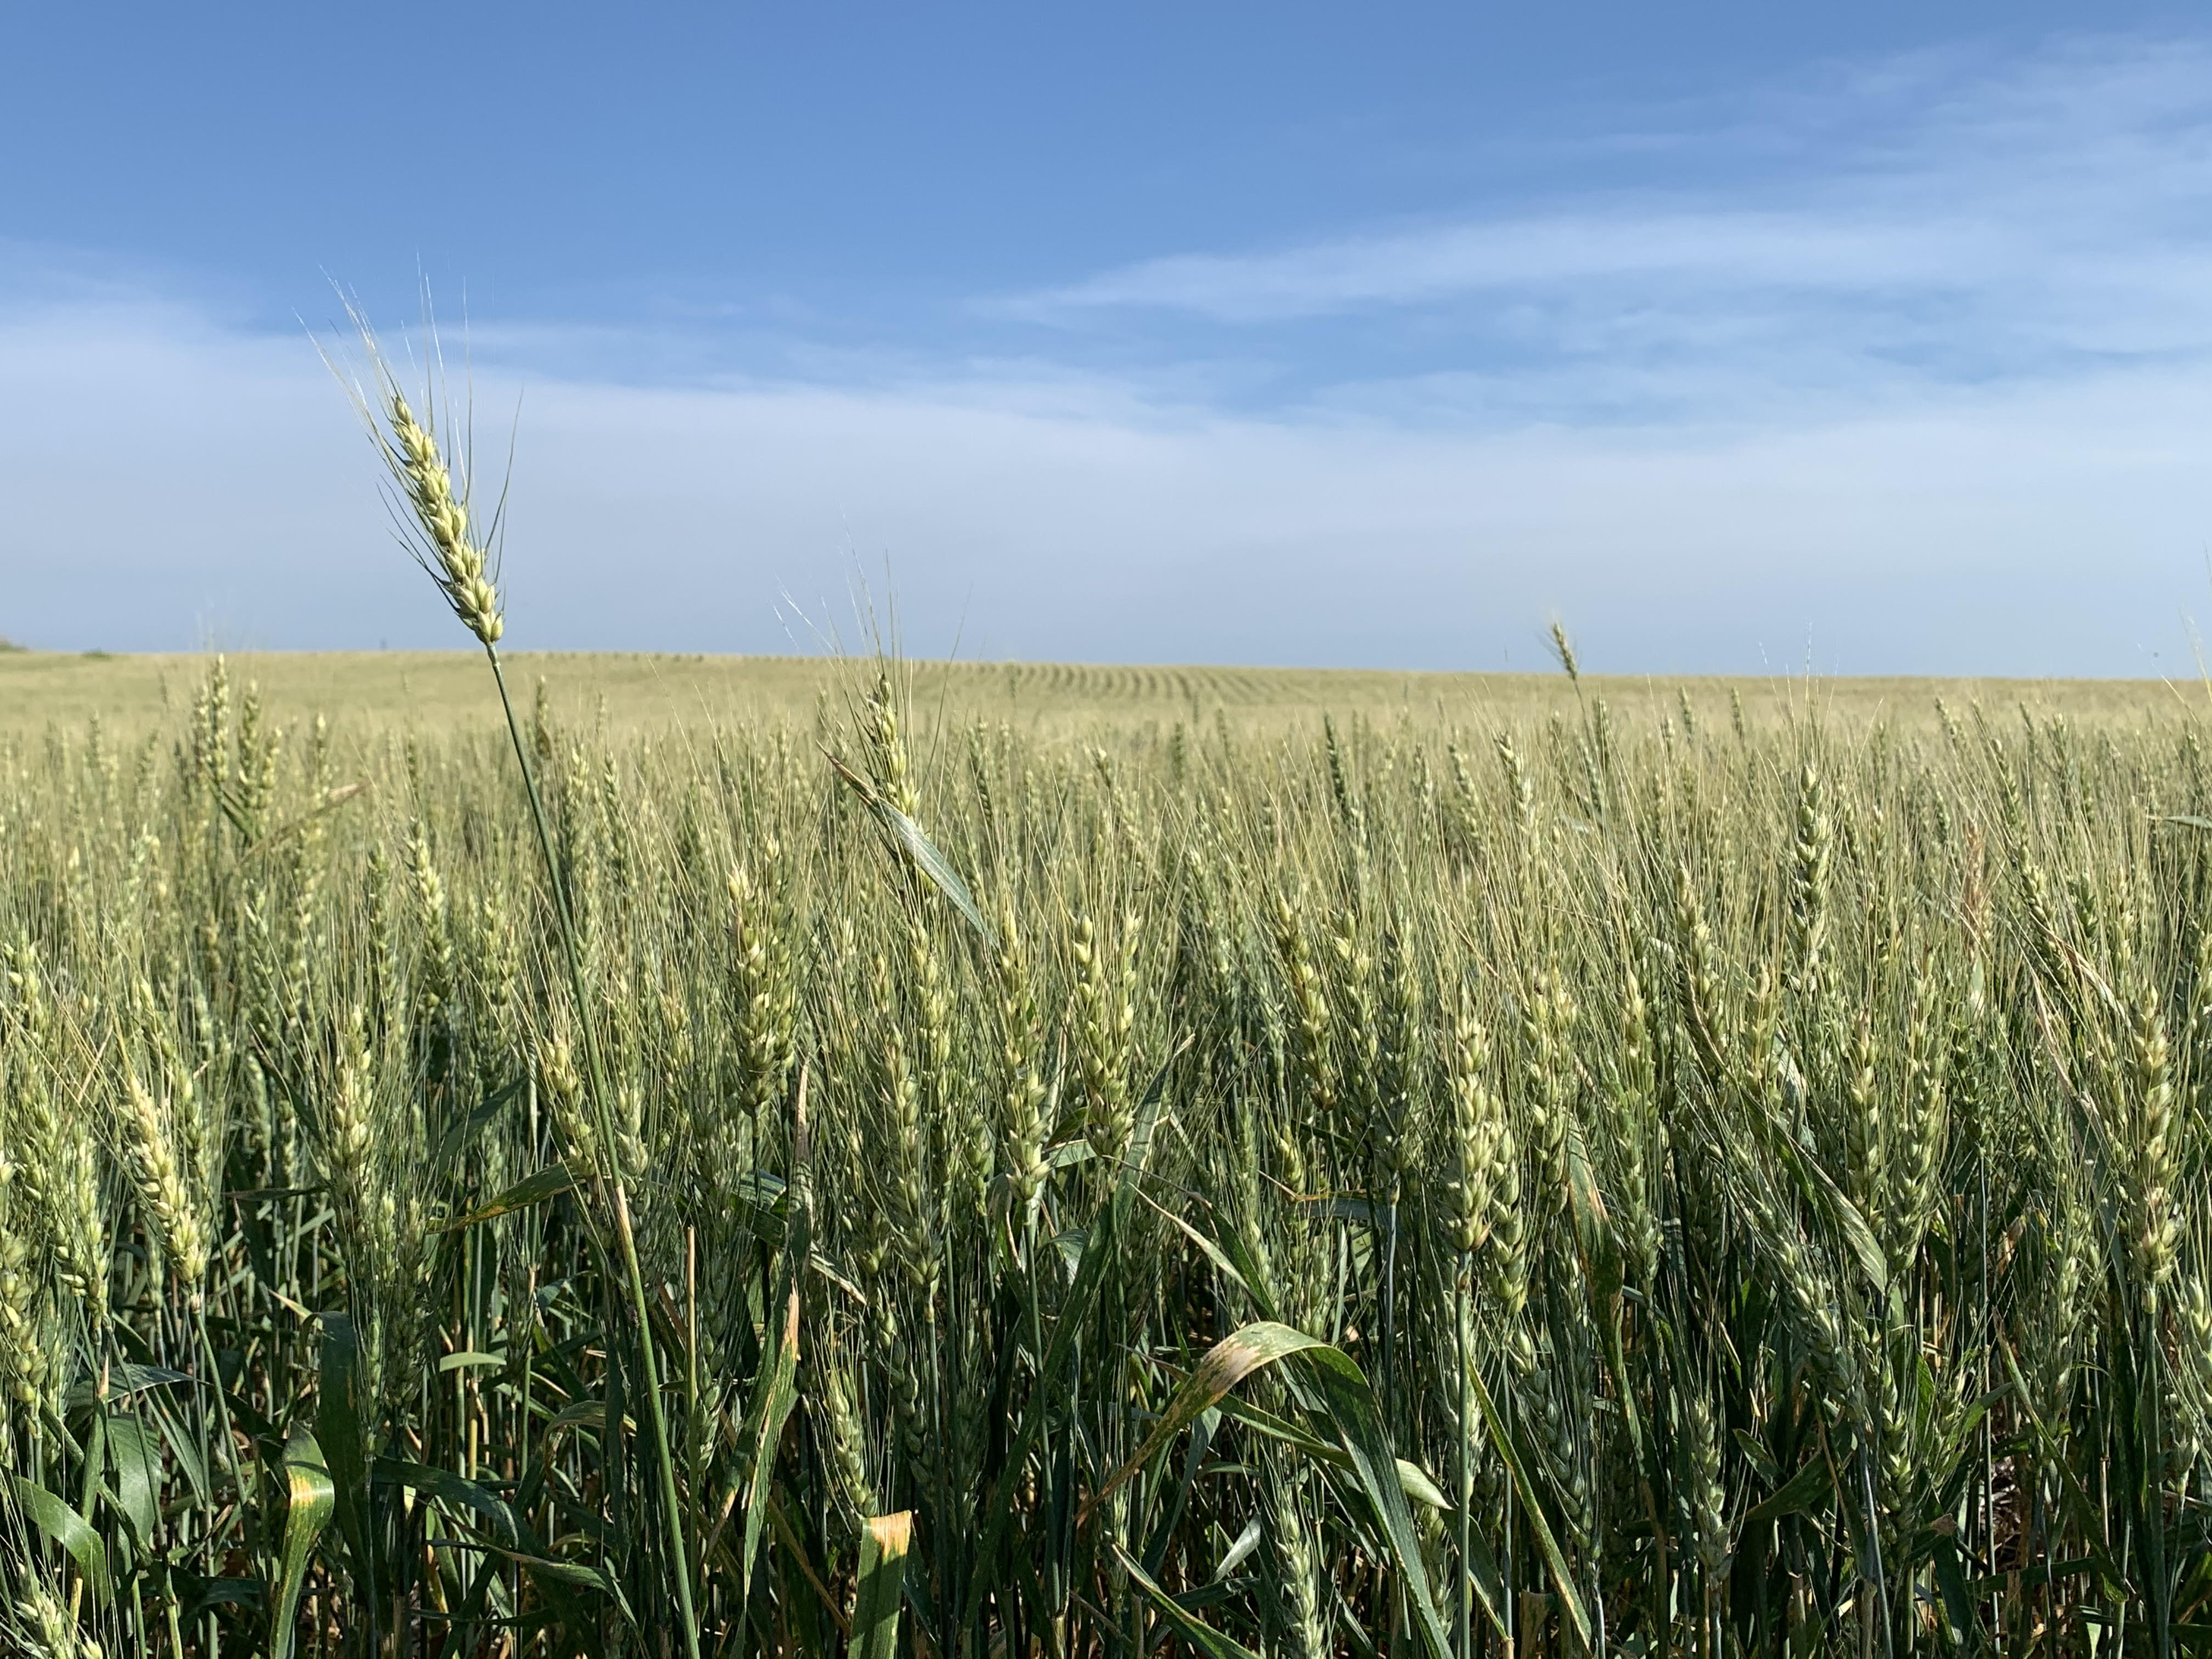 Afternoon Ag News, June 2, 2021: Land values on the rise